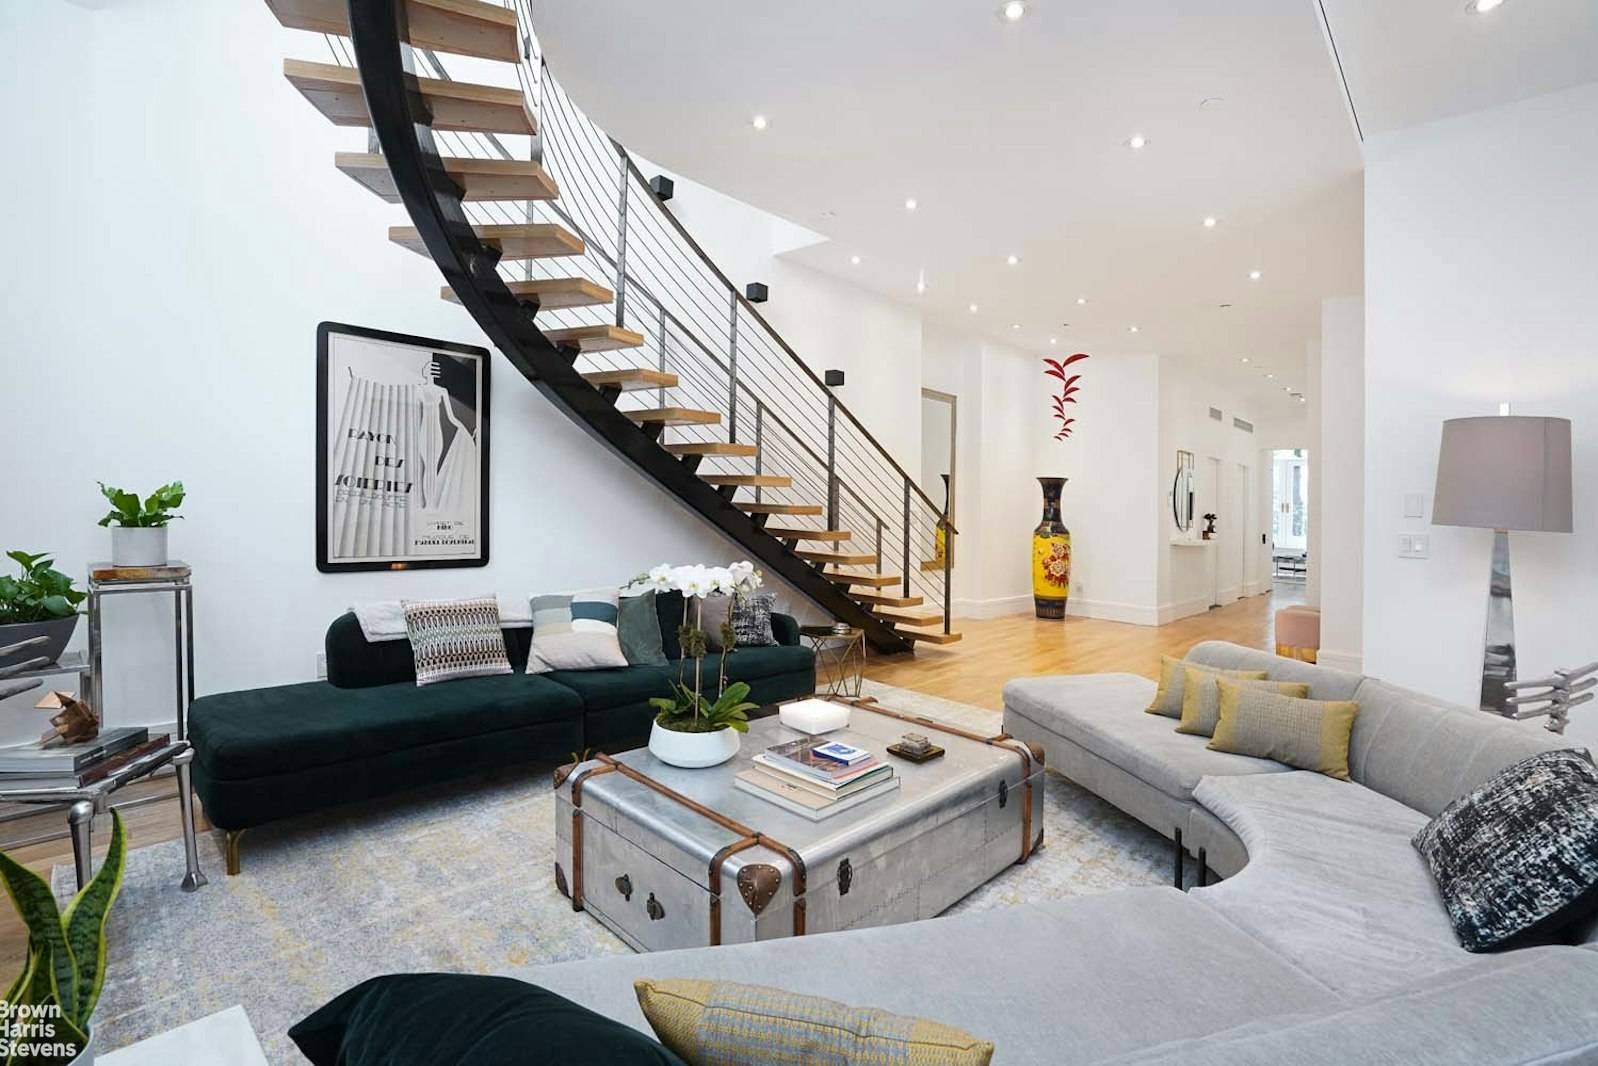 This exceptional three unit mixed use townhouse, is a remarkable example of clean modern design offering loft like living in your own private space.